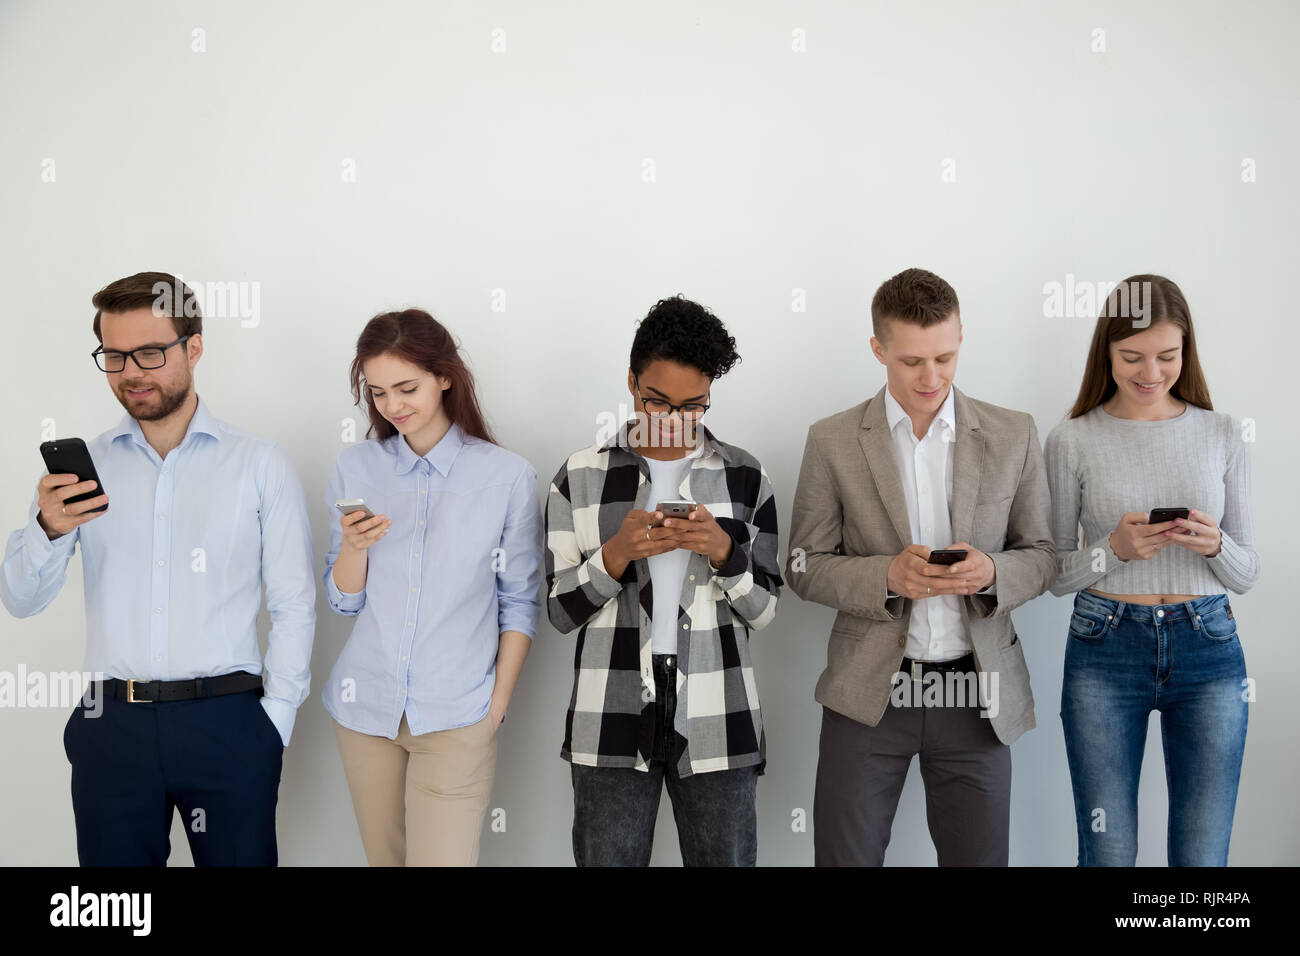 Millennial phone users businesspeople group standing in row using smartphones Stock Photo